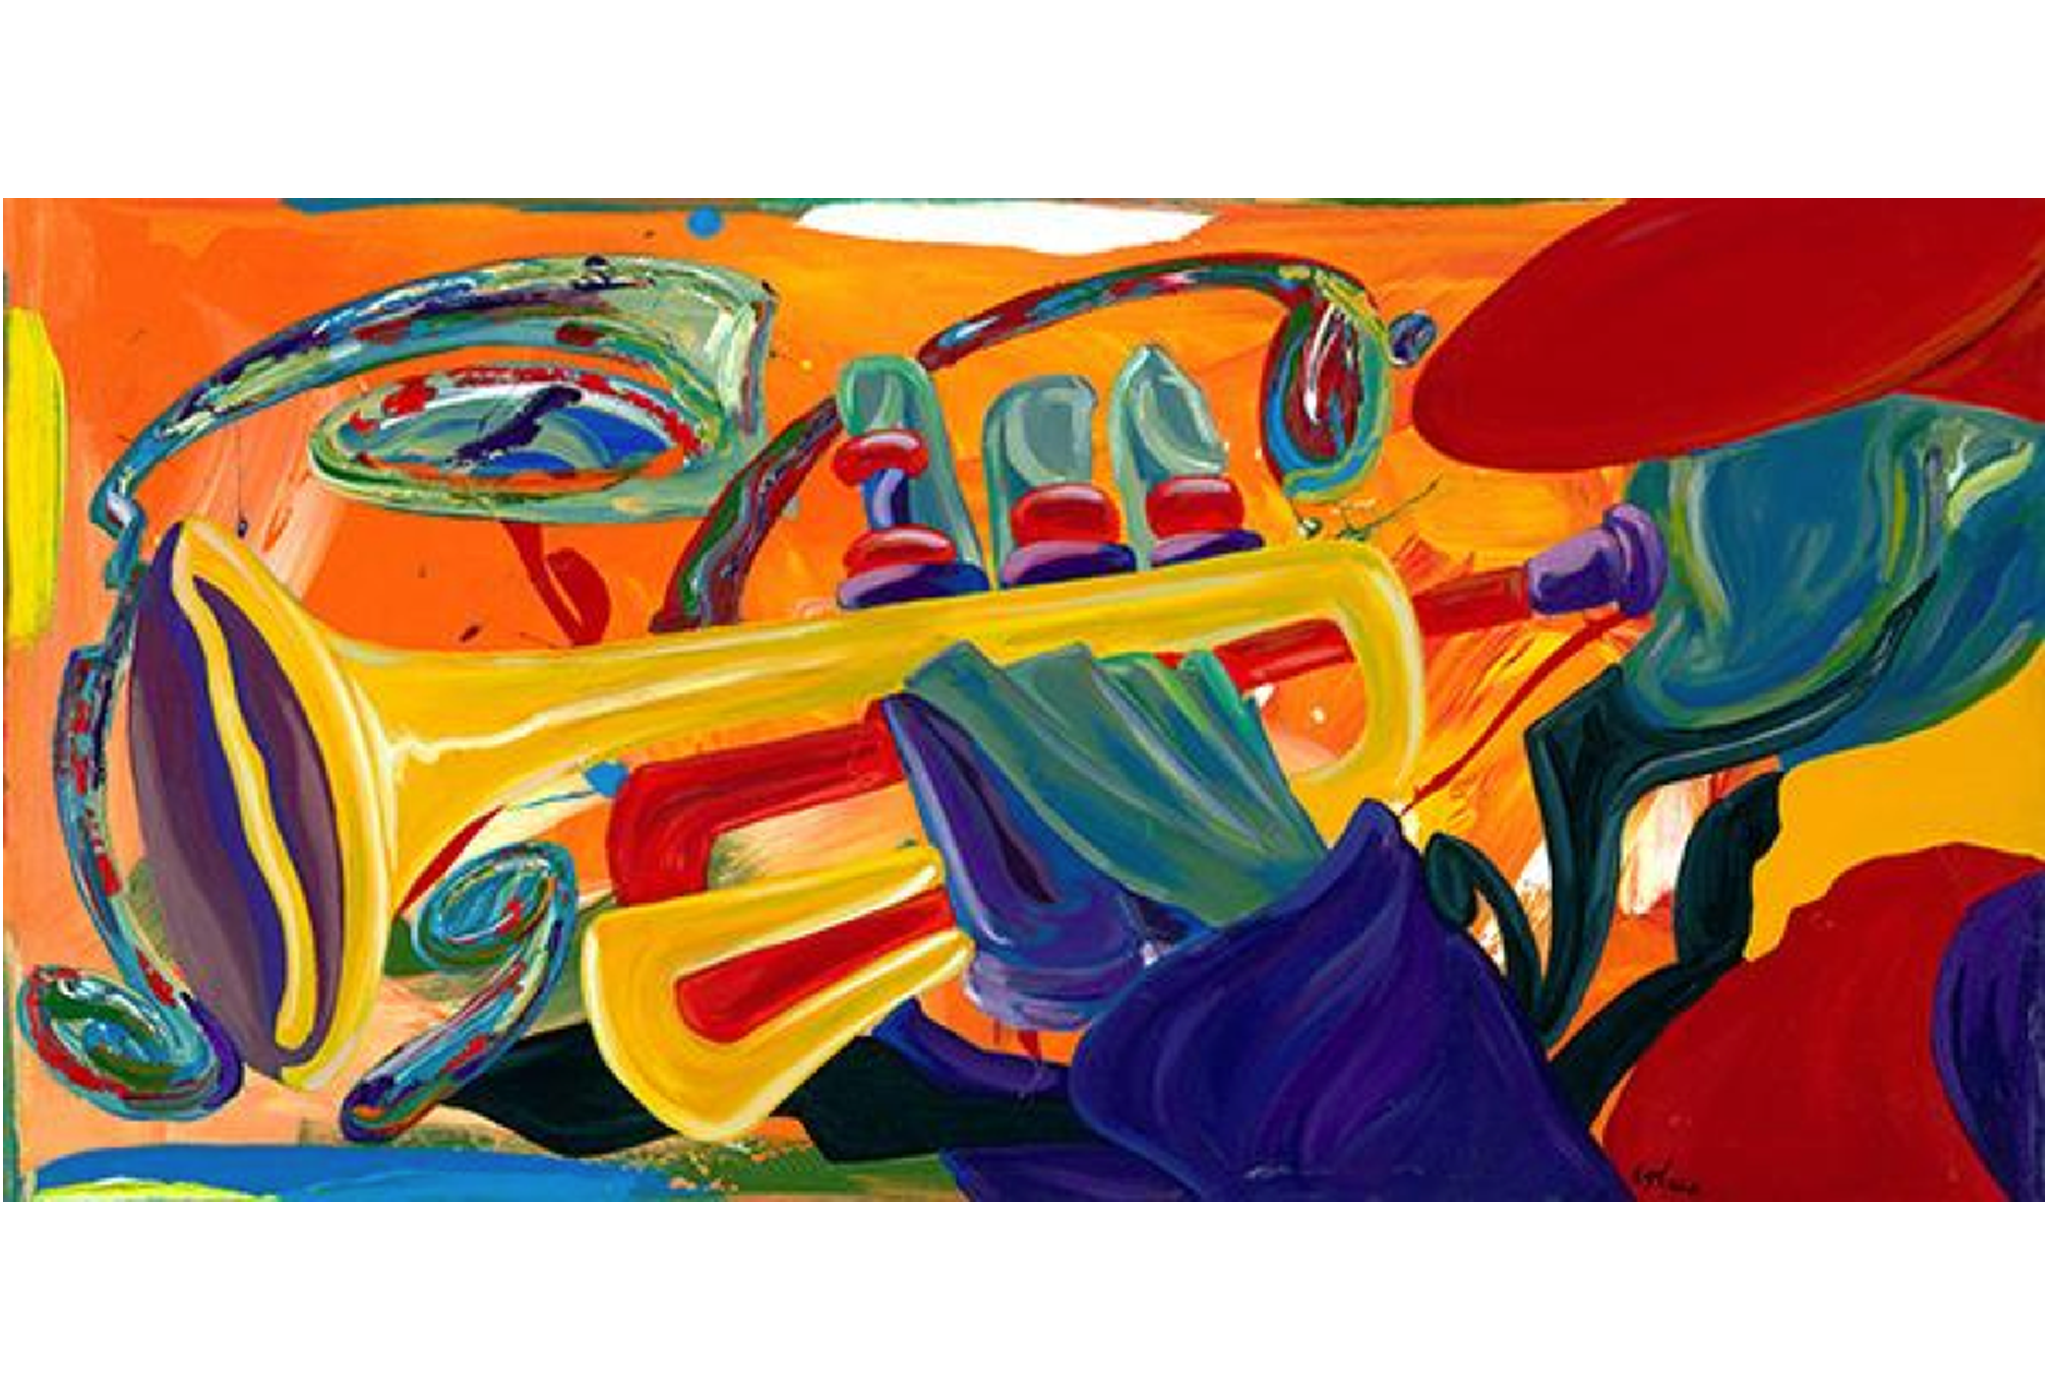 Violet, Yellow, Red" has also been used for the promotion of The 15th Annual, 2007 Capital Jazz Festival Size: 24" x 48", Acrylic on canvas by Ligel Lambert, Art donated by The Art of Ligel/Ligel.com